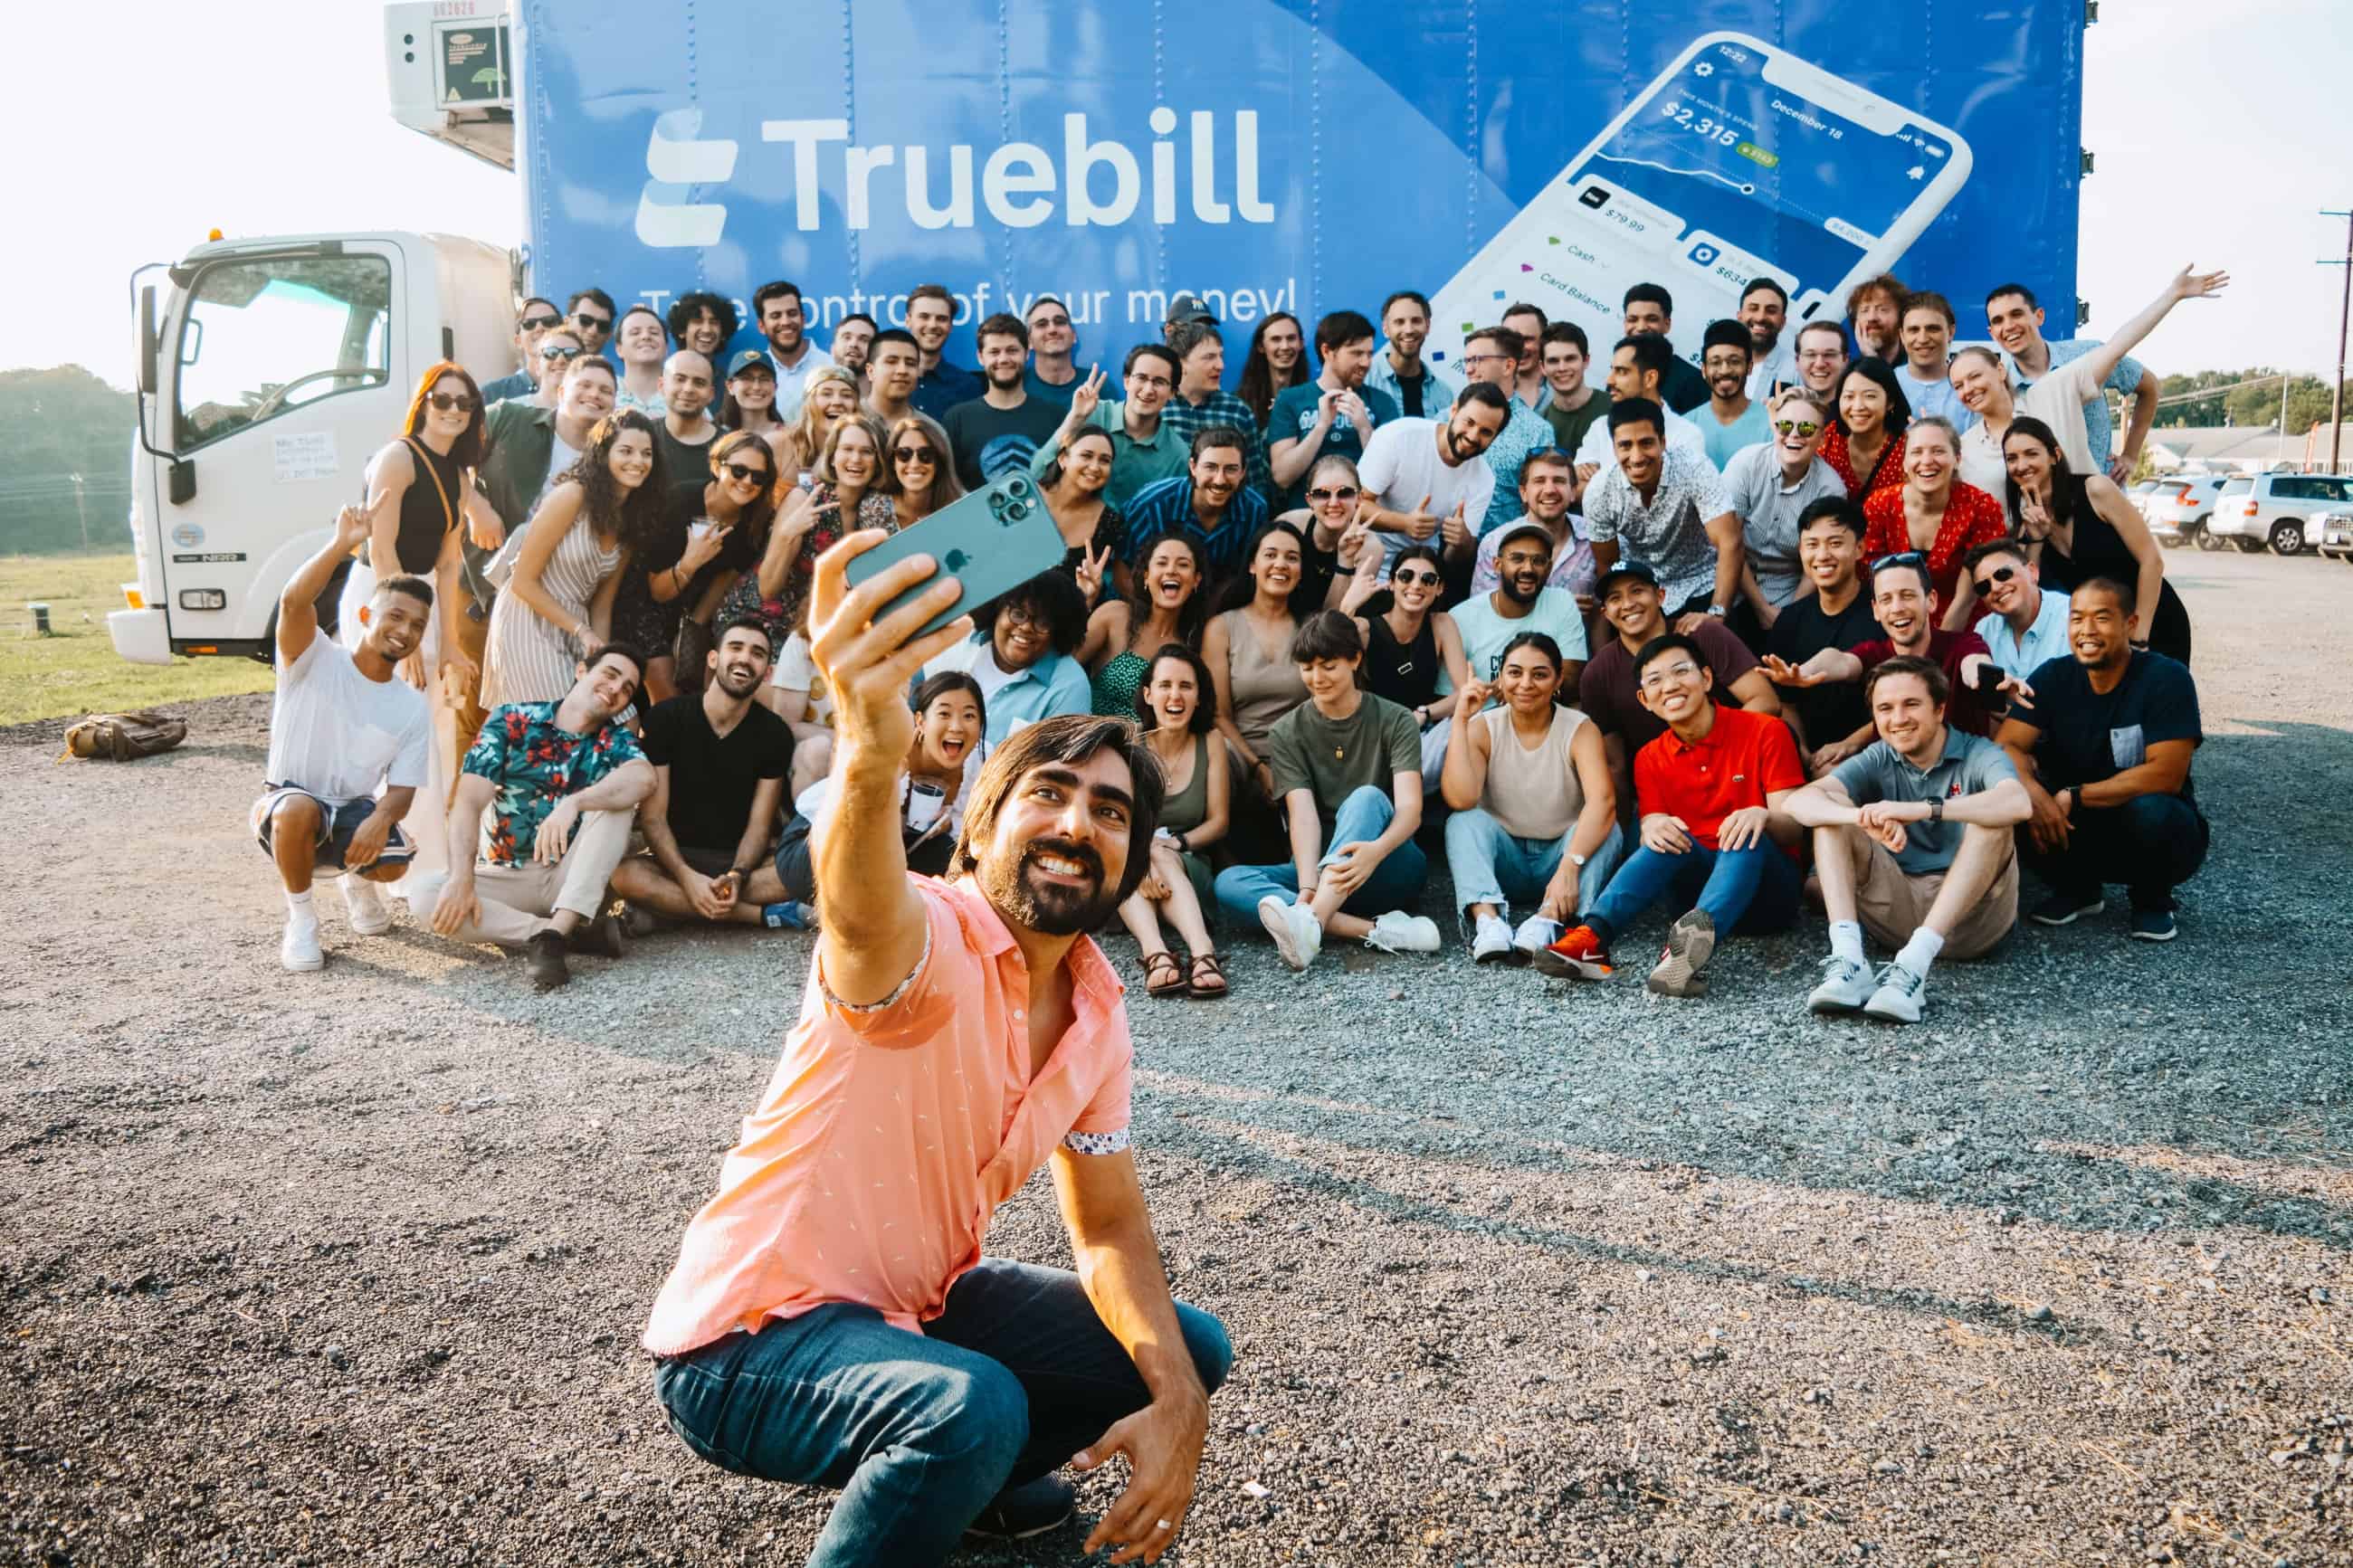 A photo of a Truebill employee taking a selfie with a large number of people in front of a truck bearing the Truebill logo.